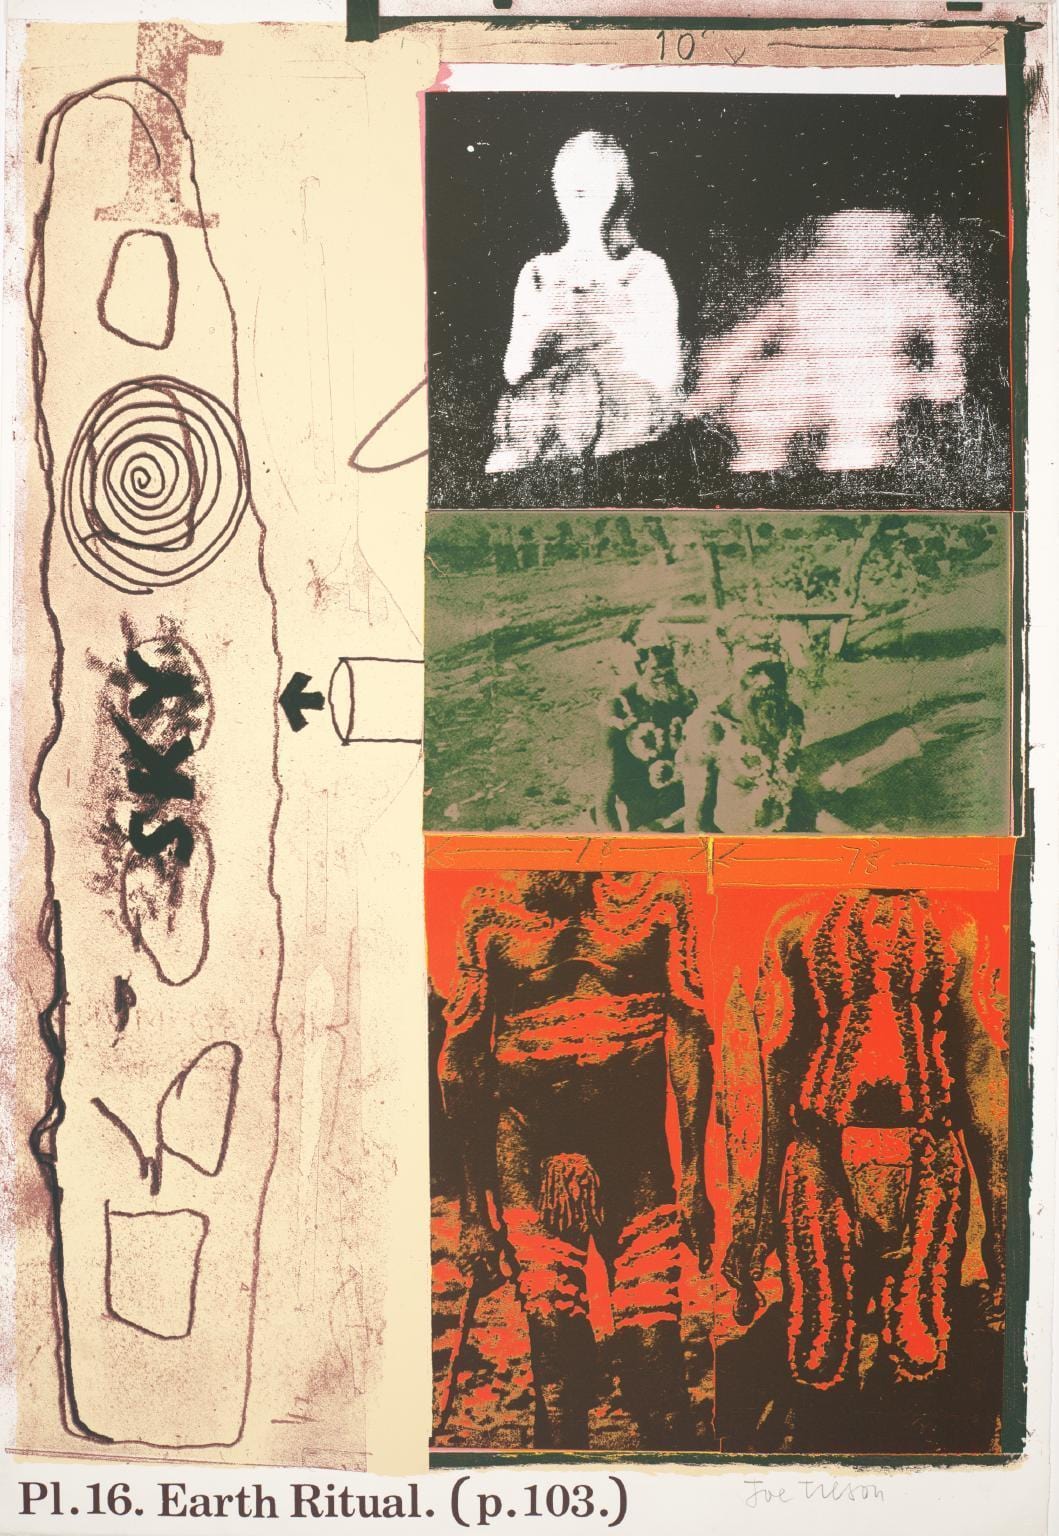 Earth Ritual (from Homage to Picasso Portfolio), 1973 Enlarged